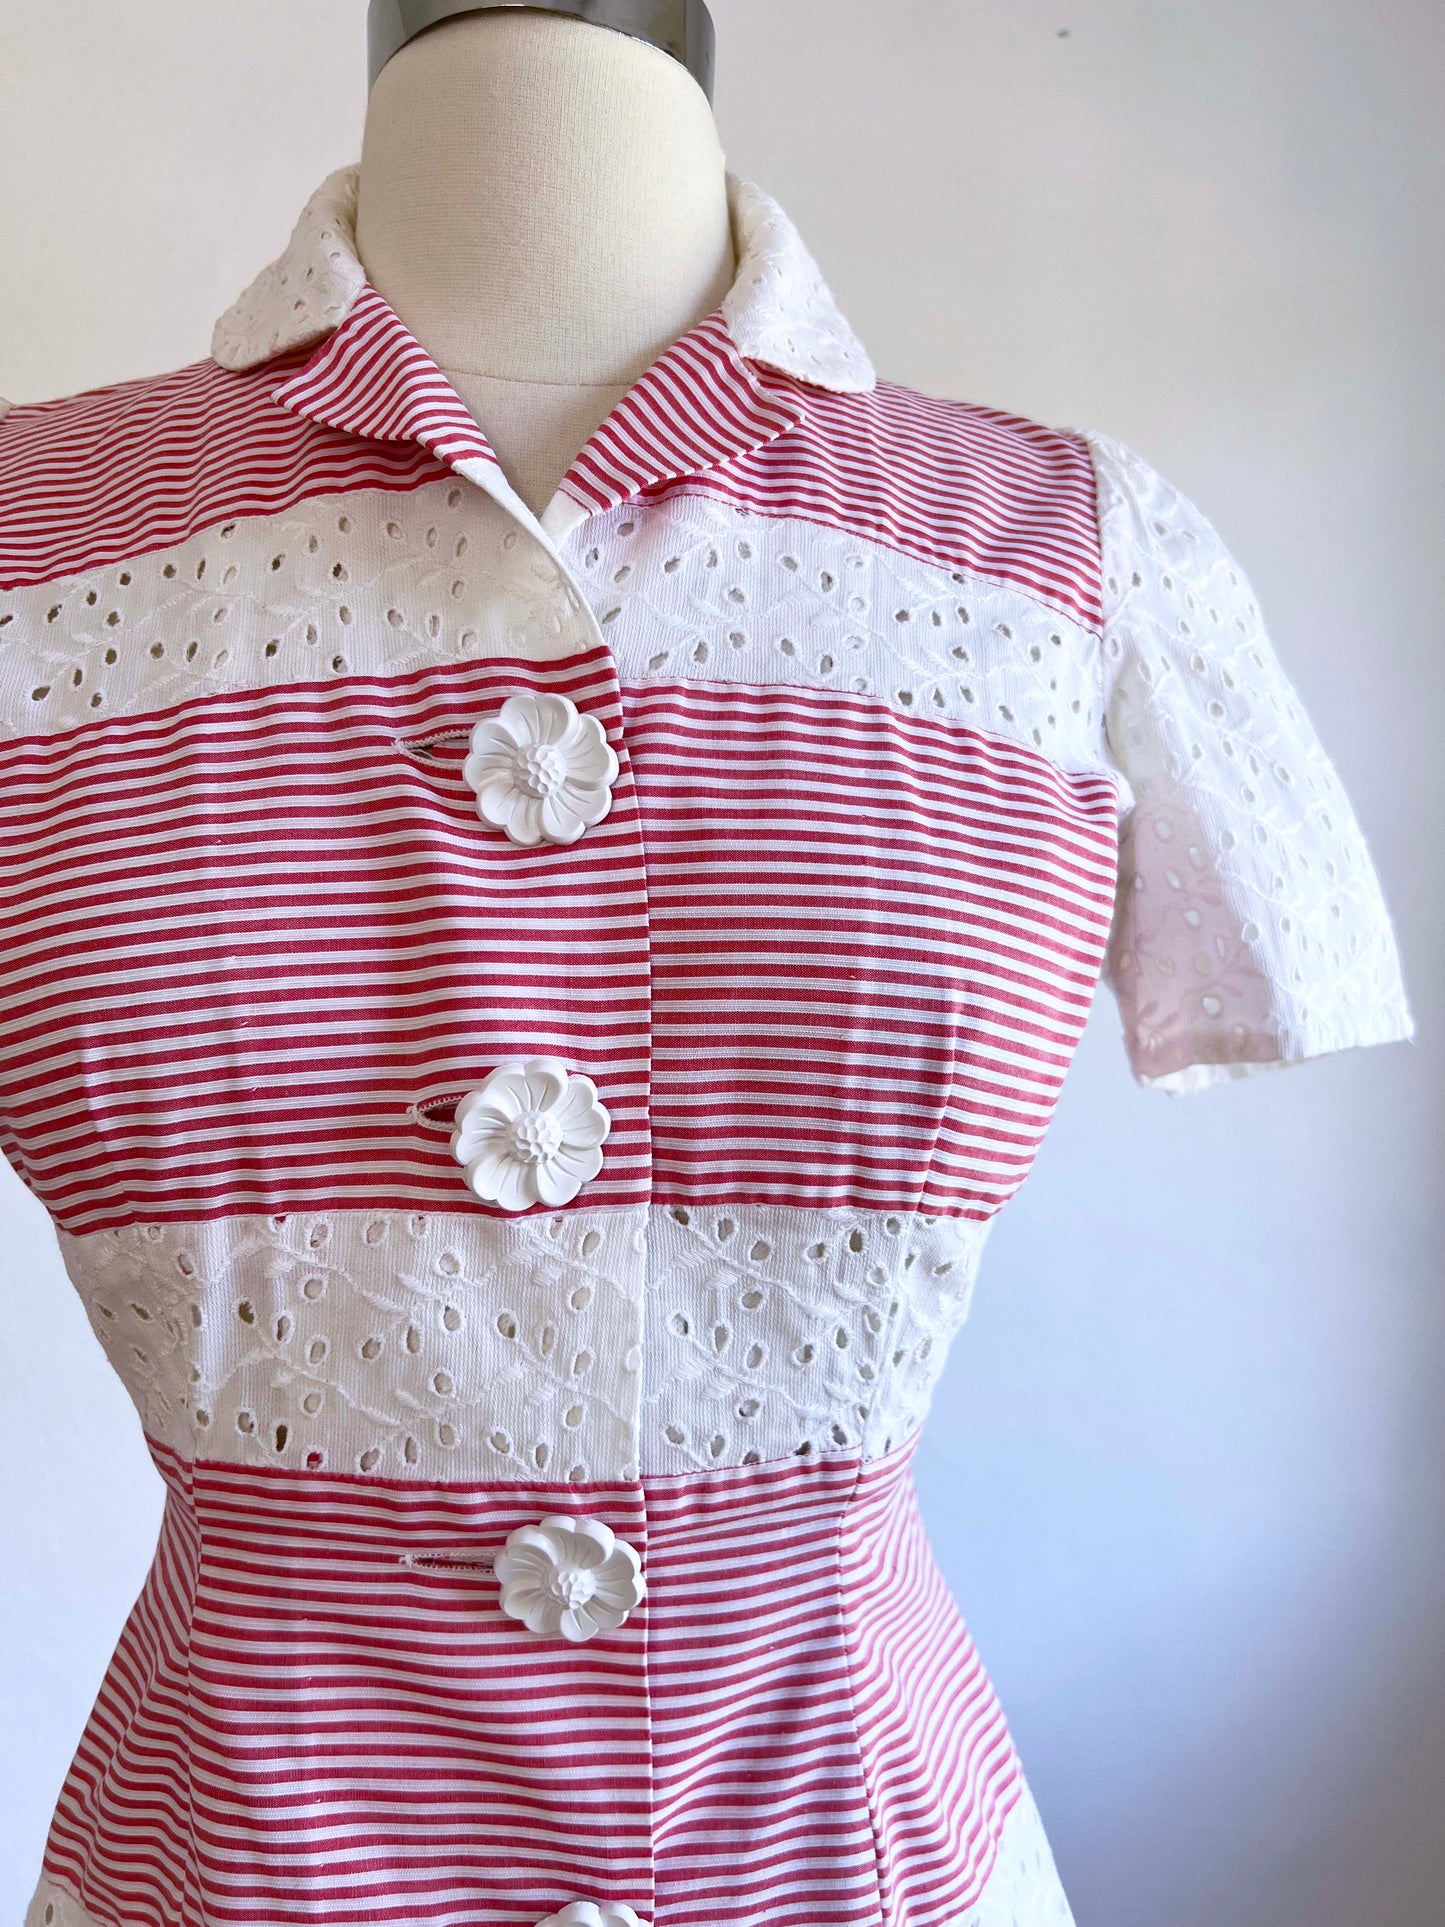 Vintage 1930s to 1940s Cusp Summer Suit - THE CUTEST Deep Pink White Stripe Cotton Eyelet Jacket Skirt w Celluloid Buttons Size XS to S